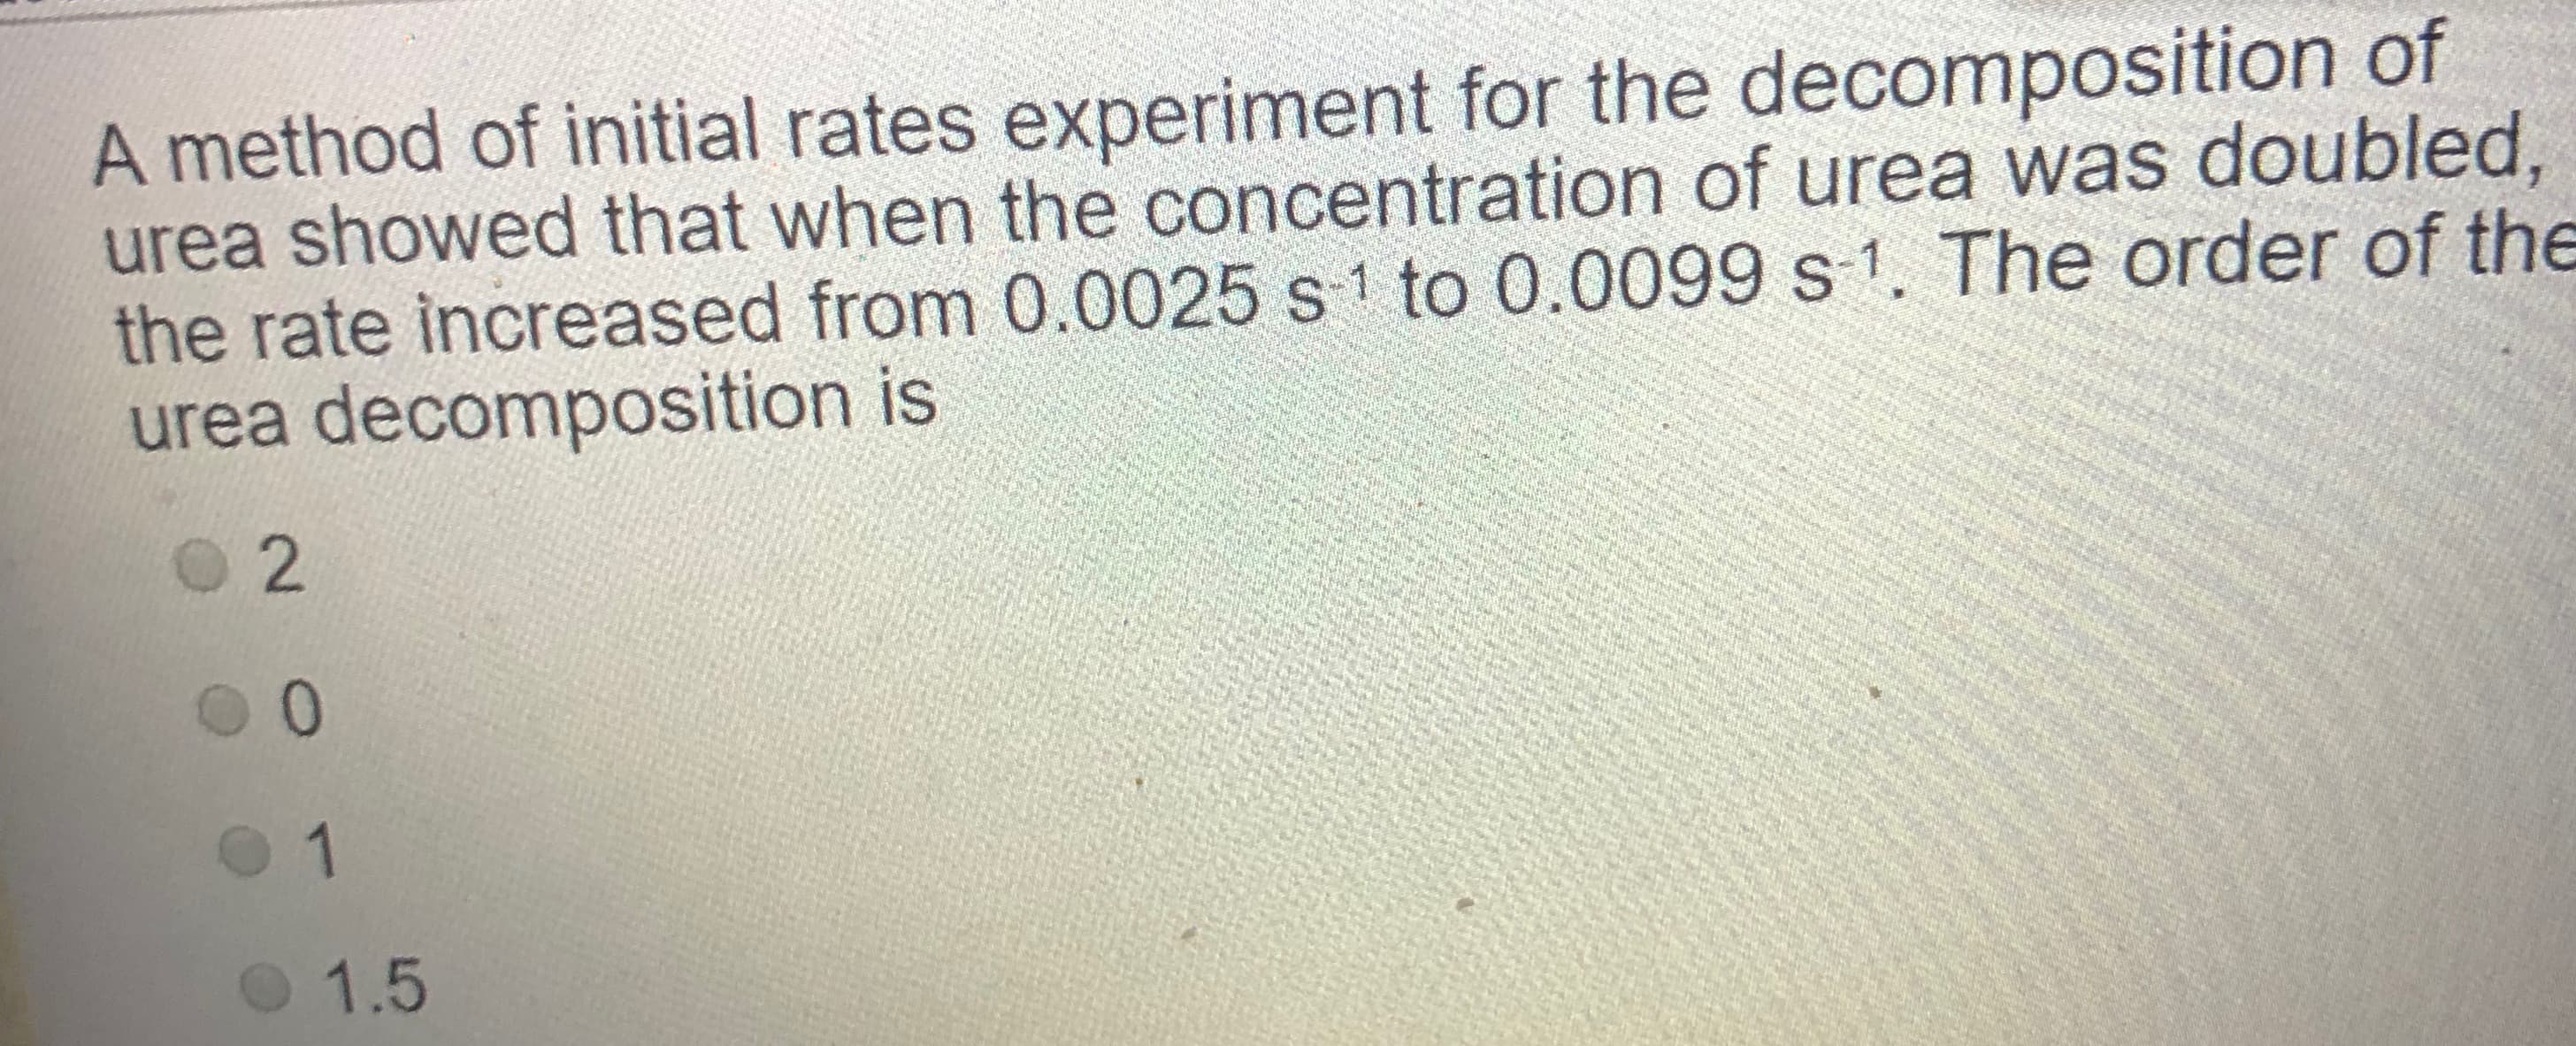 A method of initial rates experiment for the decomposition of
urea showed that when the concentration of urea was doubled,
the rate increased from 0.0025 s 1 to 0.0099 s 1. The order of the
urea decomposition is
1.5
